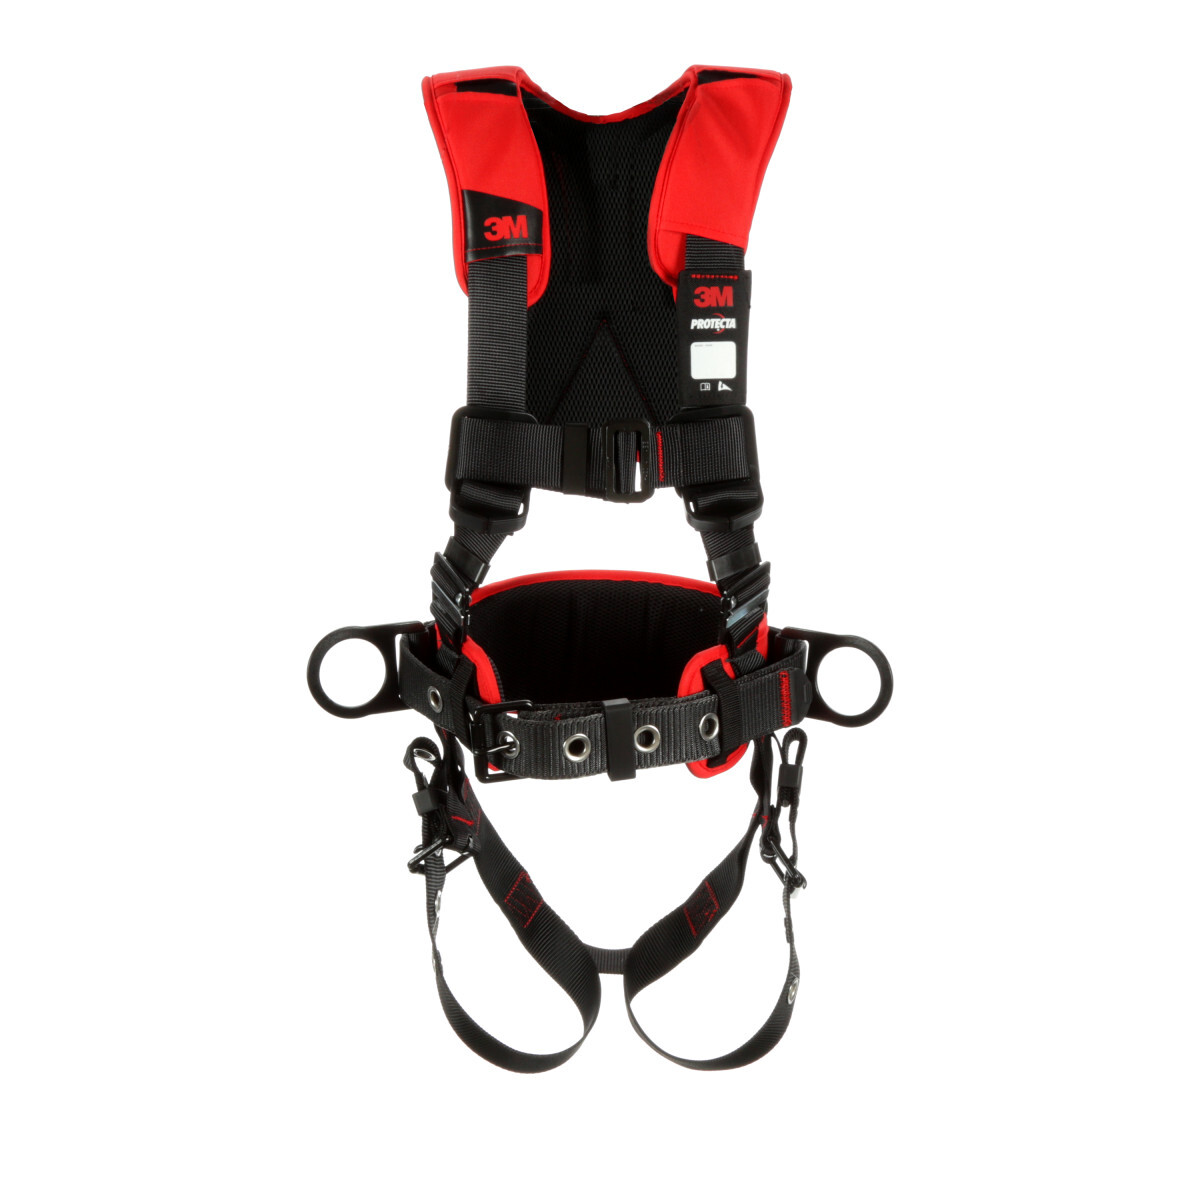 3M™ Protecta® Small Comfort Construction Style Full Body Positioning Harness With Easy-Link Web Adapter, Auto-Resetting Lanyard